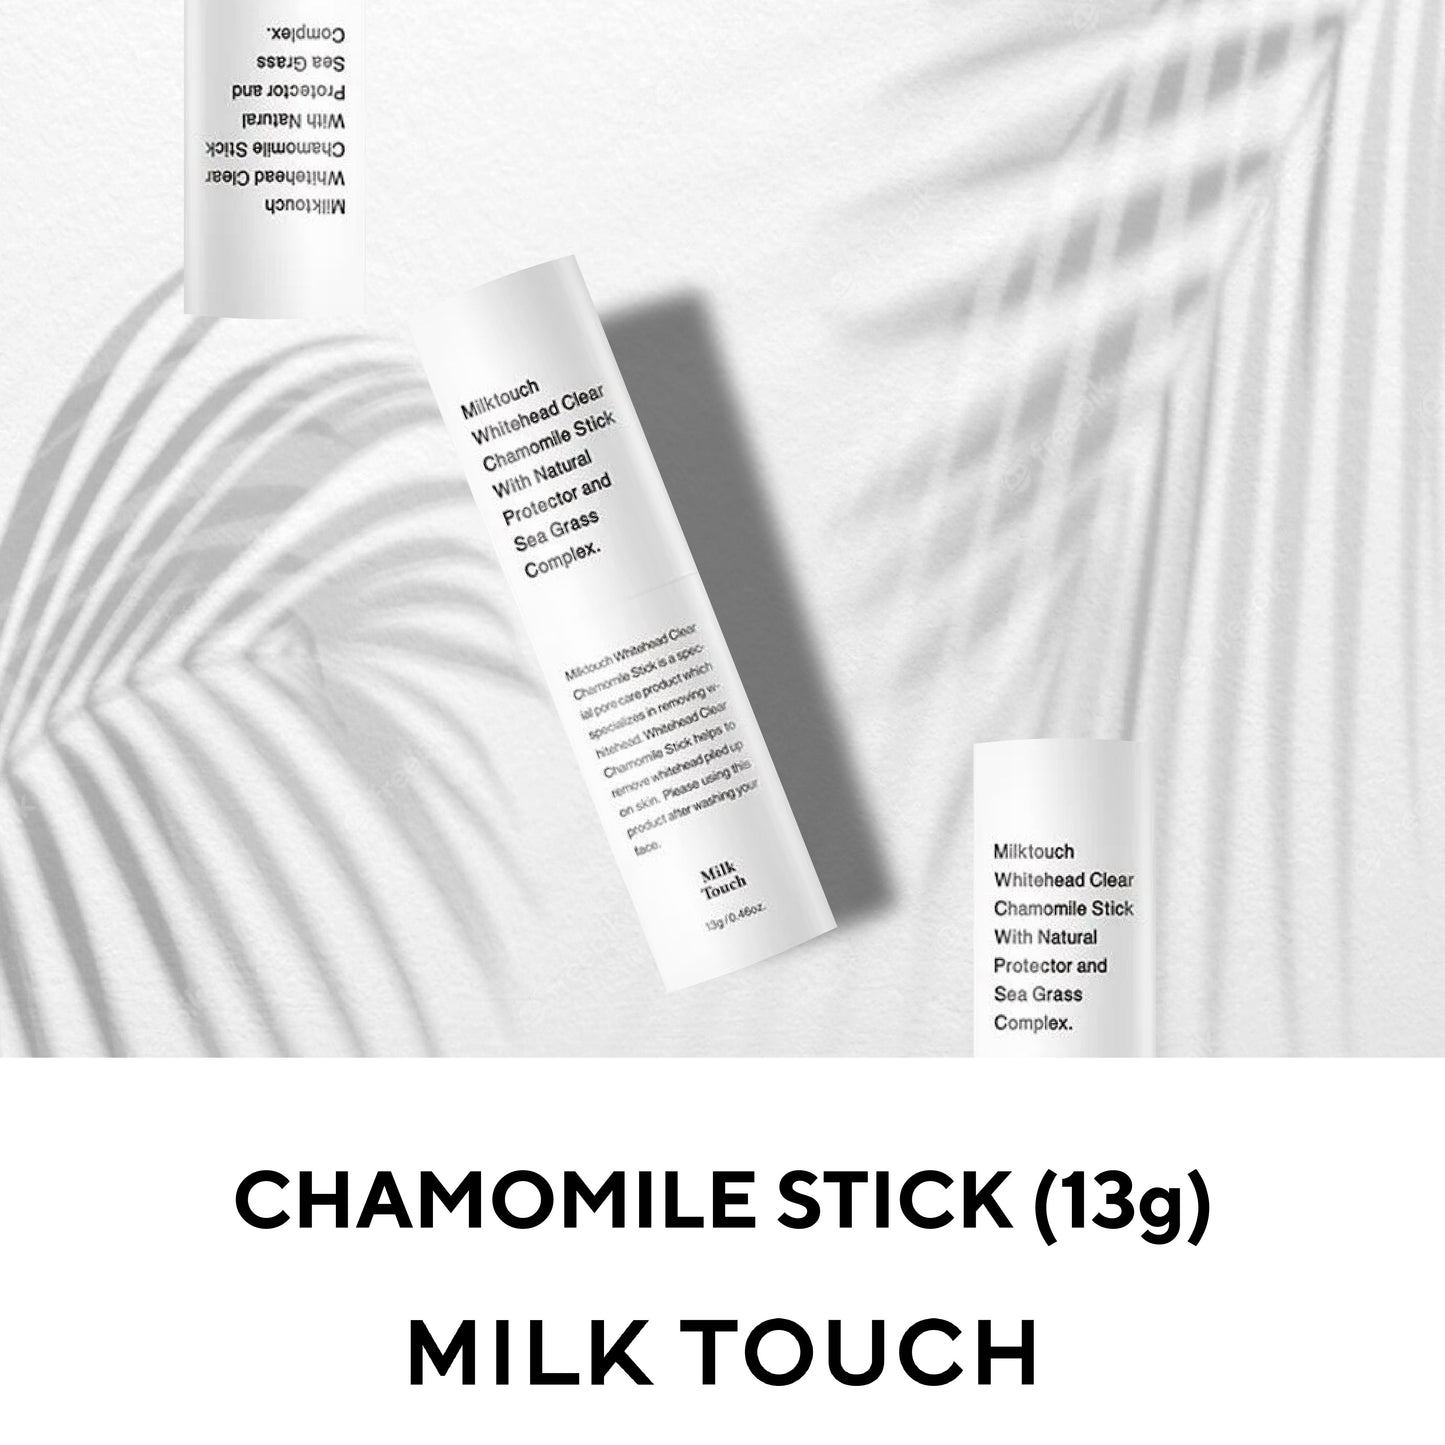 MILKTOUCH Whitehead Clear Chamomile Stick (13gr)